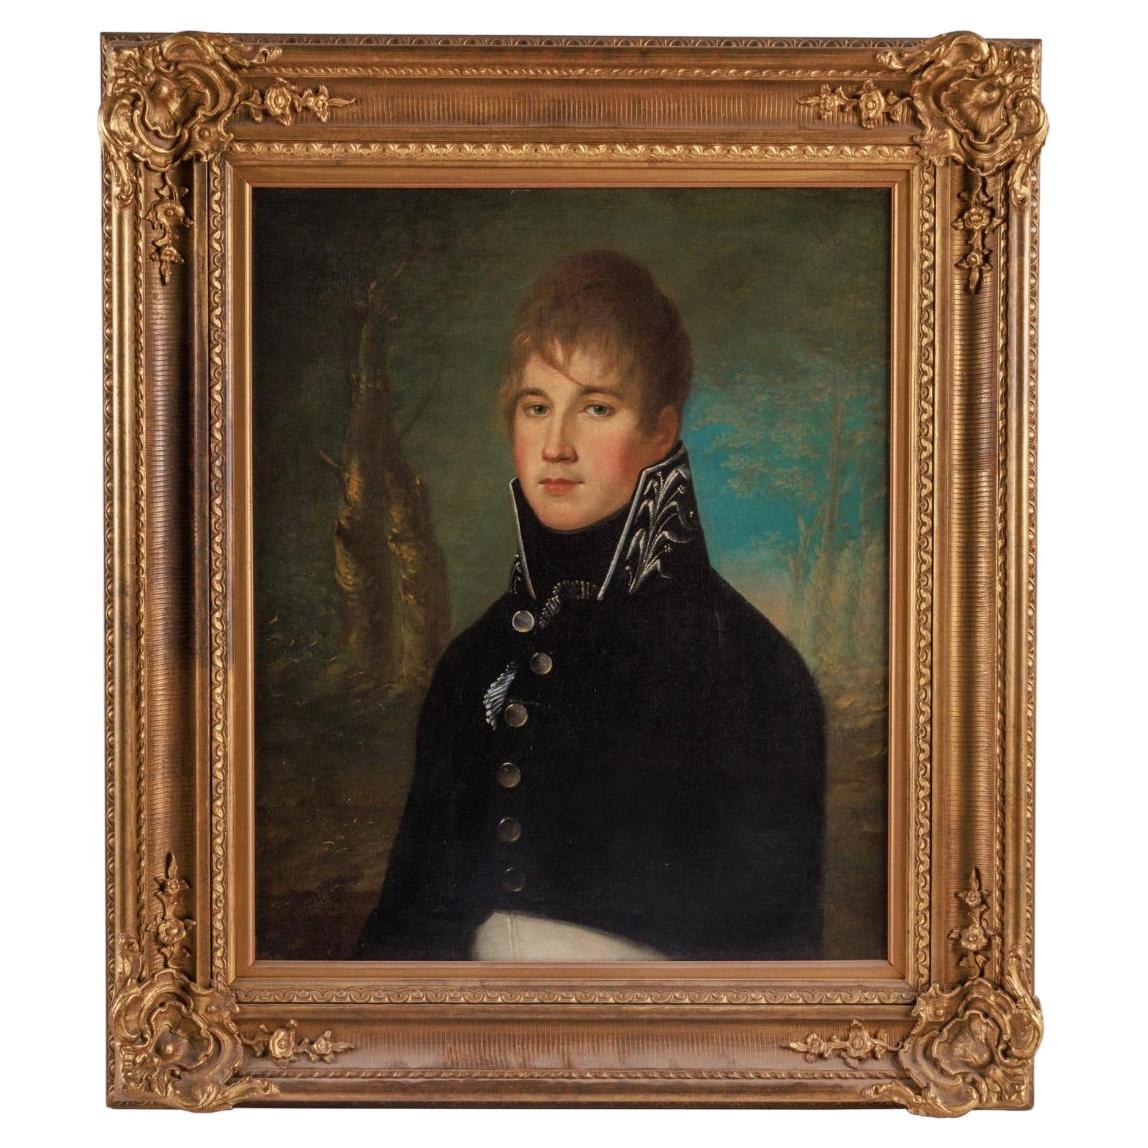 French School, 19th Century a Fine Quality Portrait of "A Young Officer" For Sale